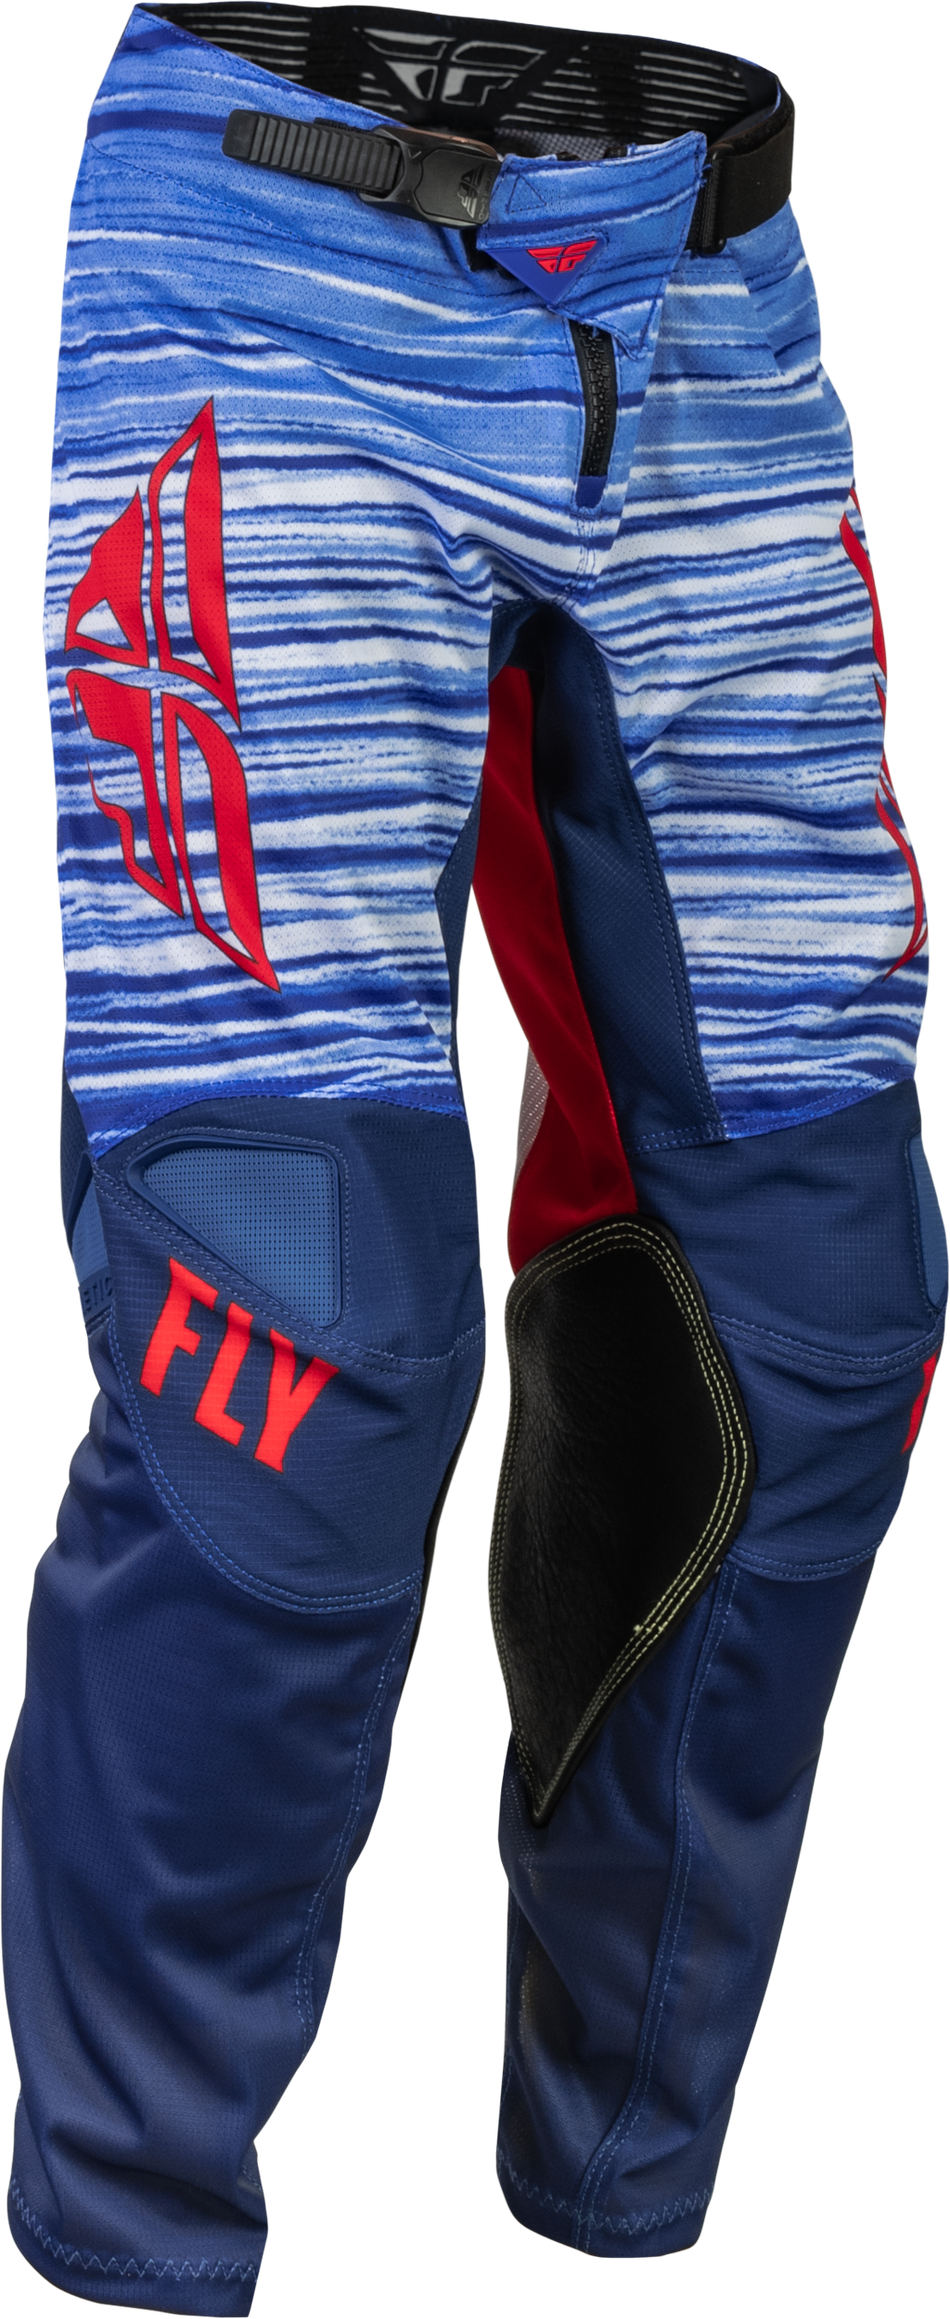 FLY RACING Youth Kinetic Mesh Pants Red/White/Blue Sz 22 376-34422